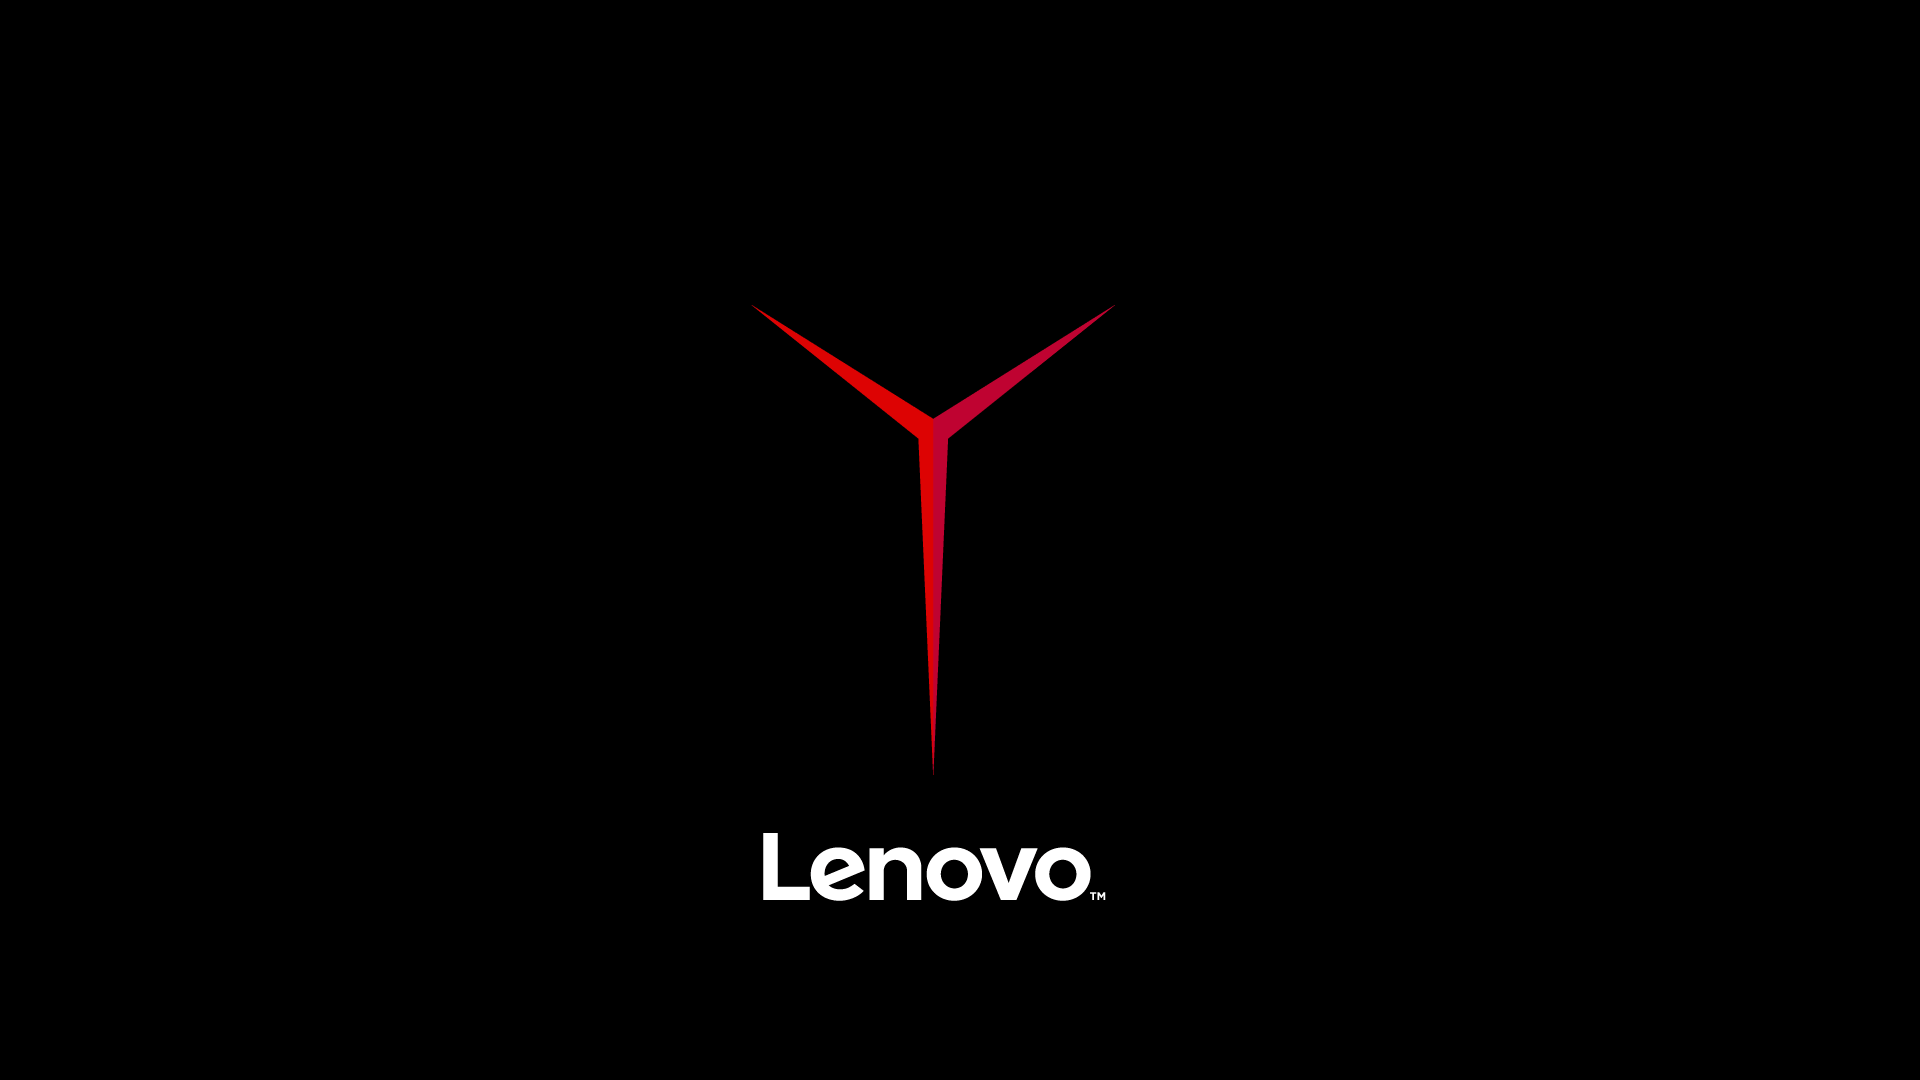 Lenovo Gaming Logo - Dear Lenovo, let the Y700 have a nice boot logo like the Y900 or